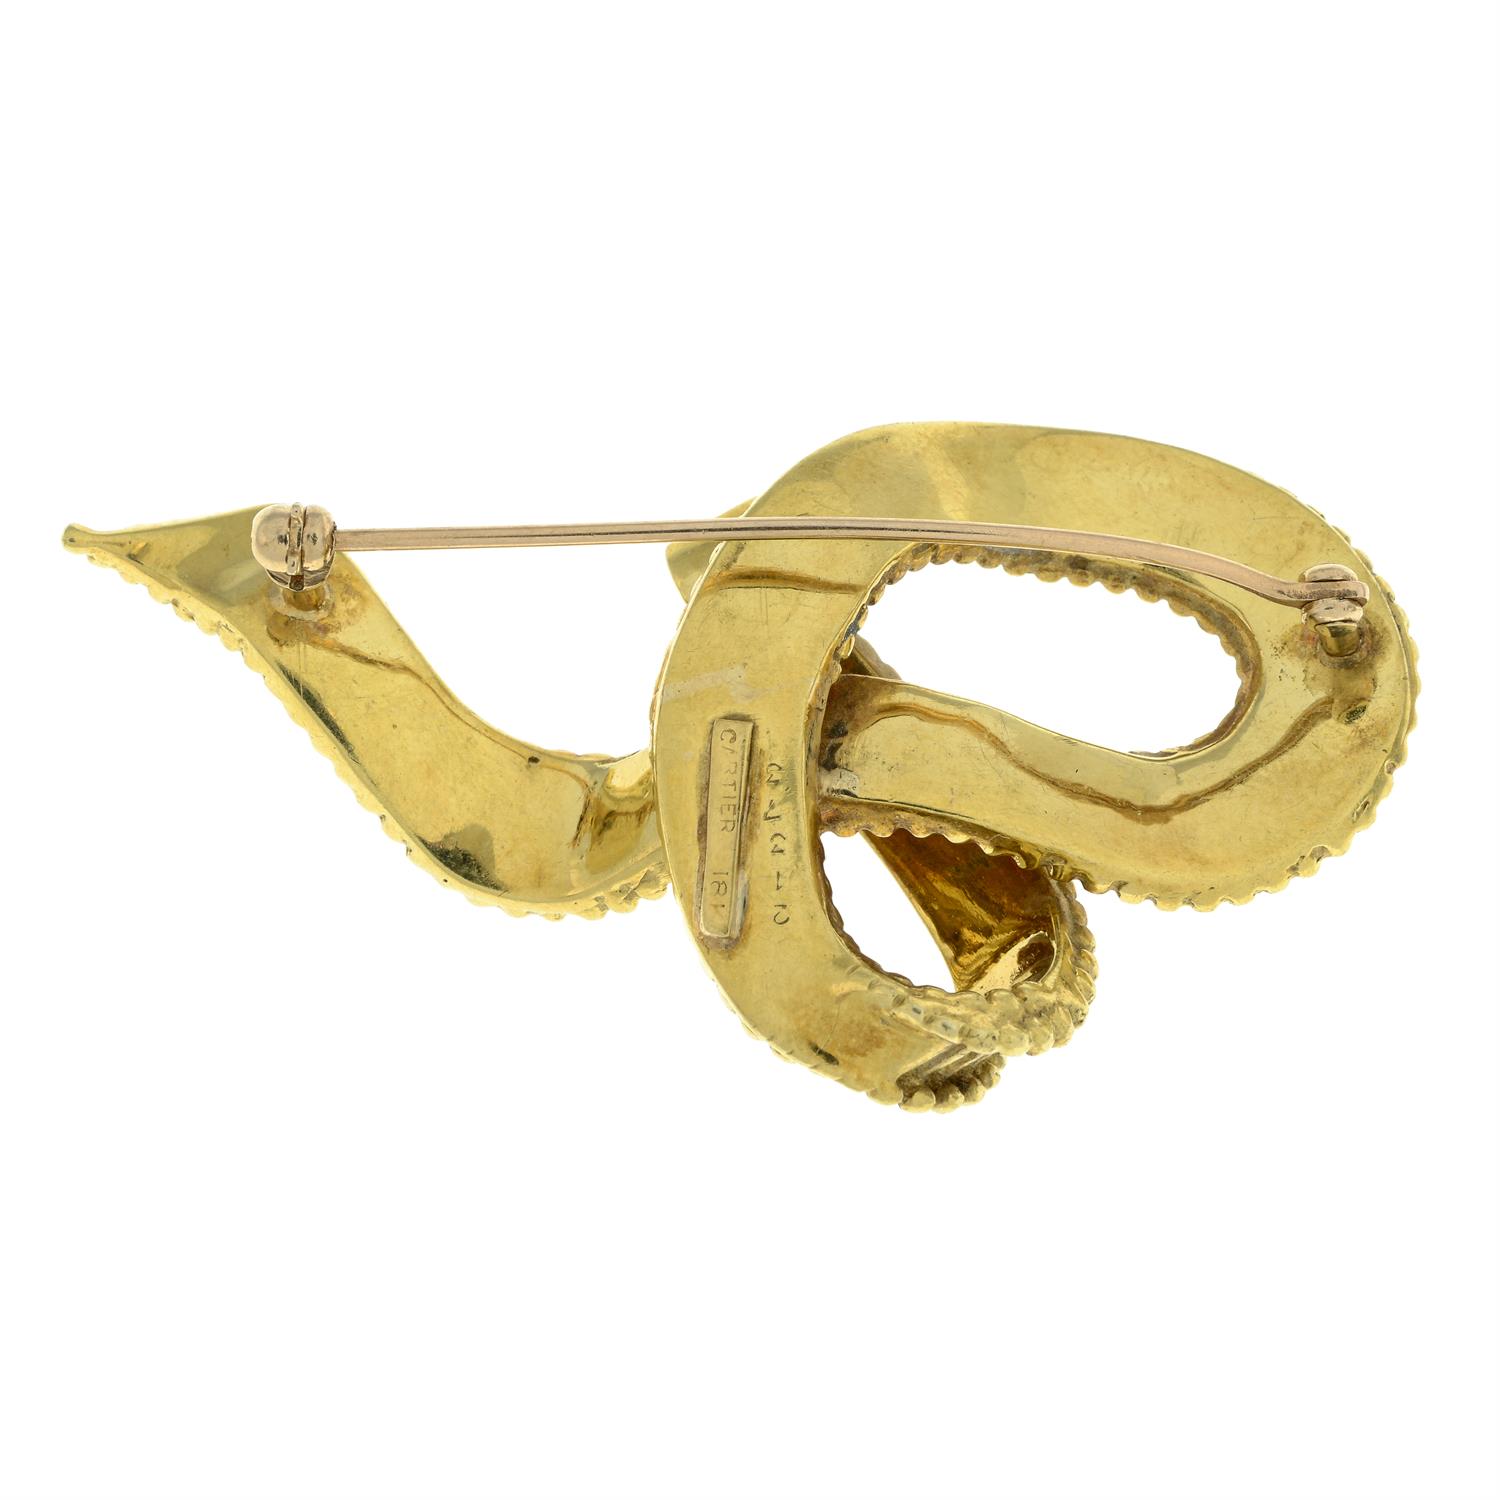 Mid 20th century 18ct gold brooch, by Cartier - Image 3 of 5